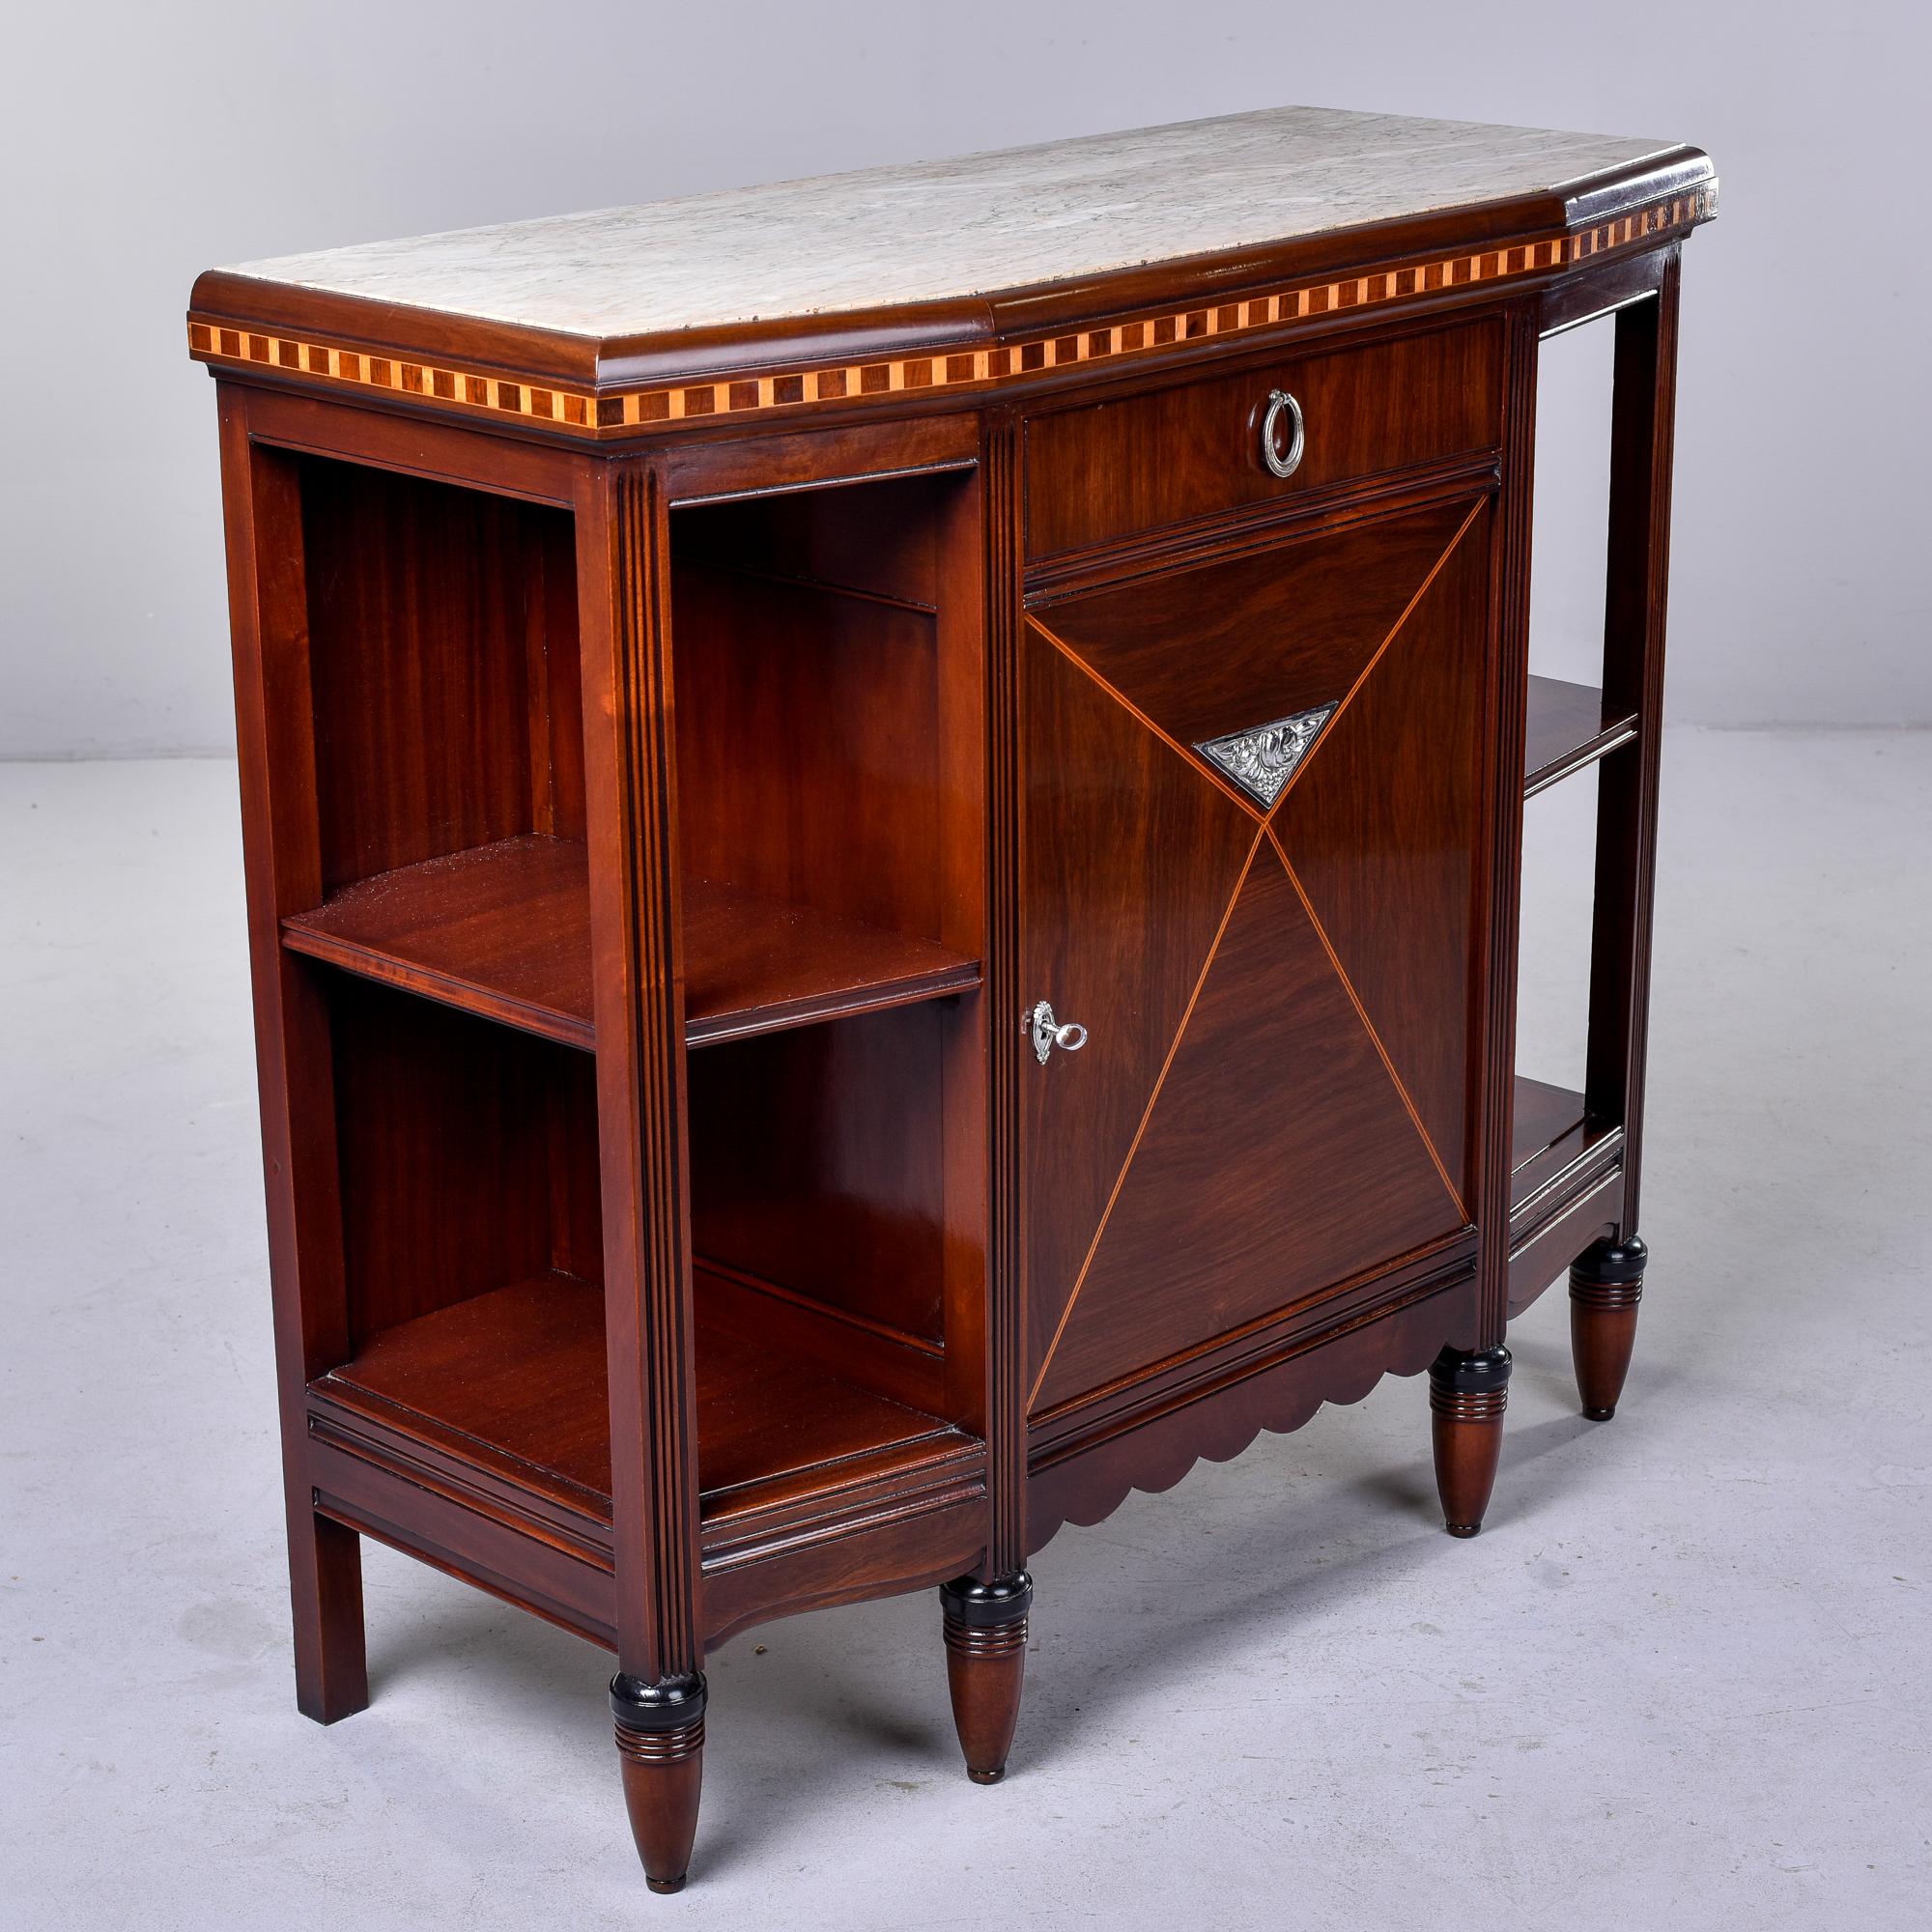 This circa 1910 Art Nouveau style marble-topped mahogany sideboard was found in France. The cabinet has four front legs and two back legs. Sideboard is topped with a pale beige marble and the front edge and cabinet door feature decorative inlay and